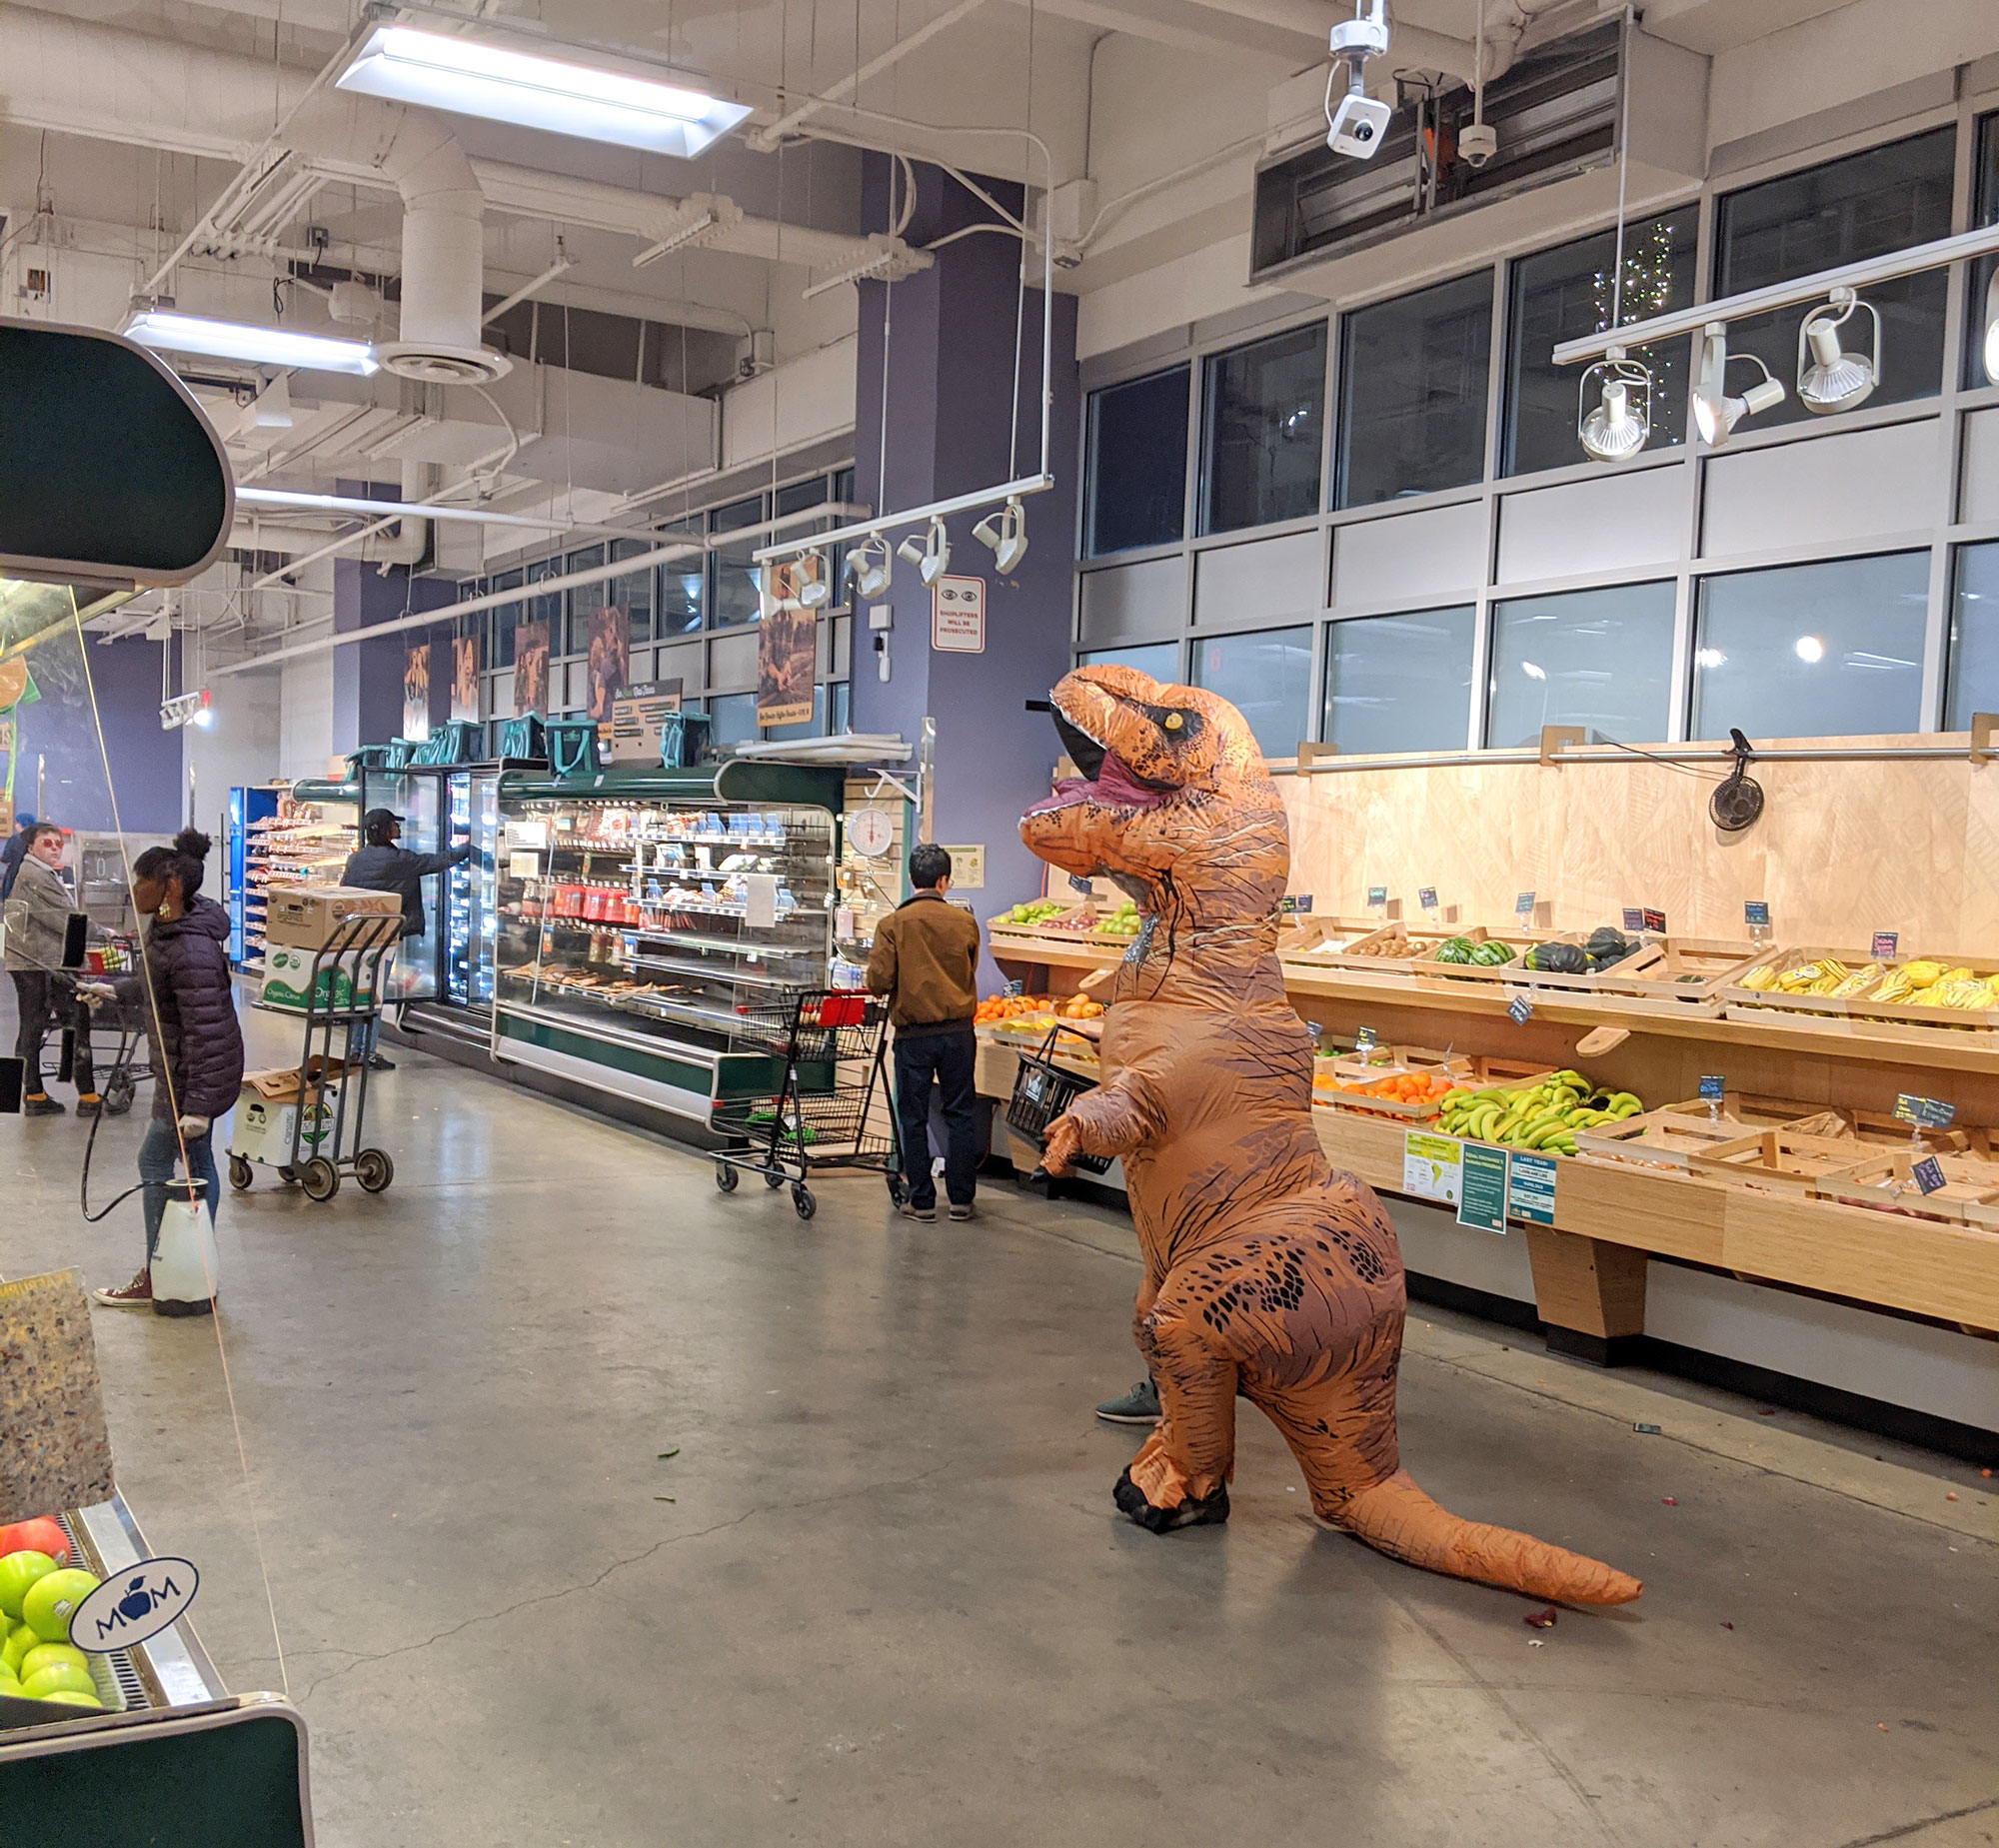 A dinosaur costume at Mom's Grocery during the first day of Coronavirus quarantine.